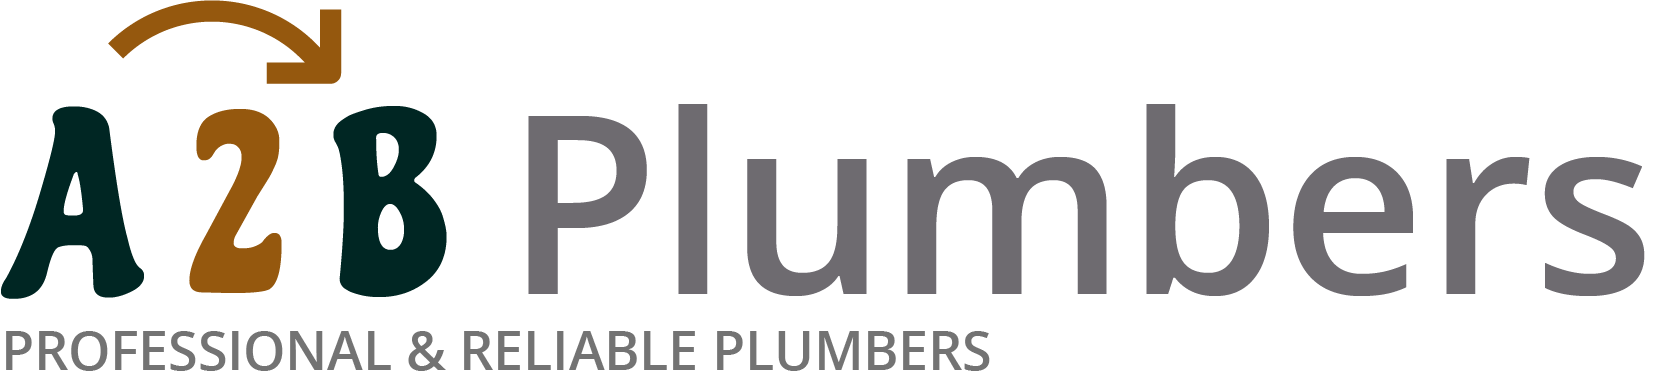 If you need a boiler installed, a radiator repaired or a leaking tap fixed, call us now - we provide services for properties in Truro and the local area.